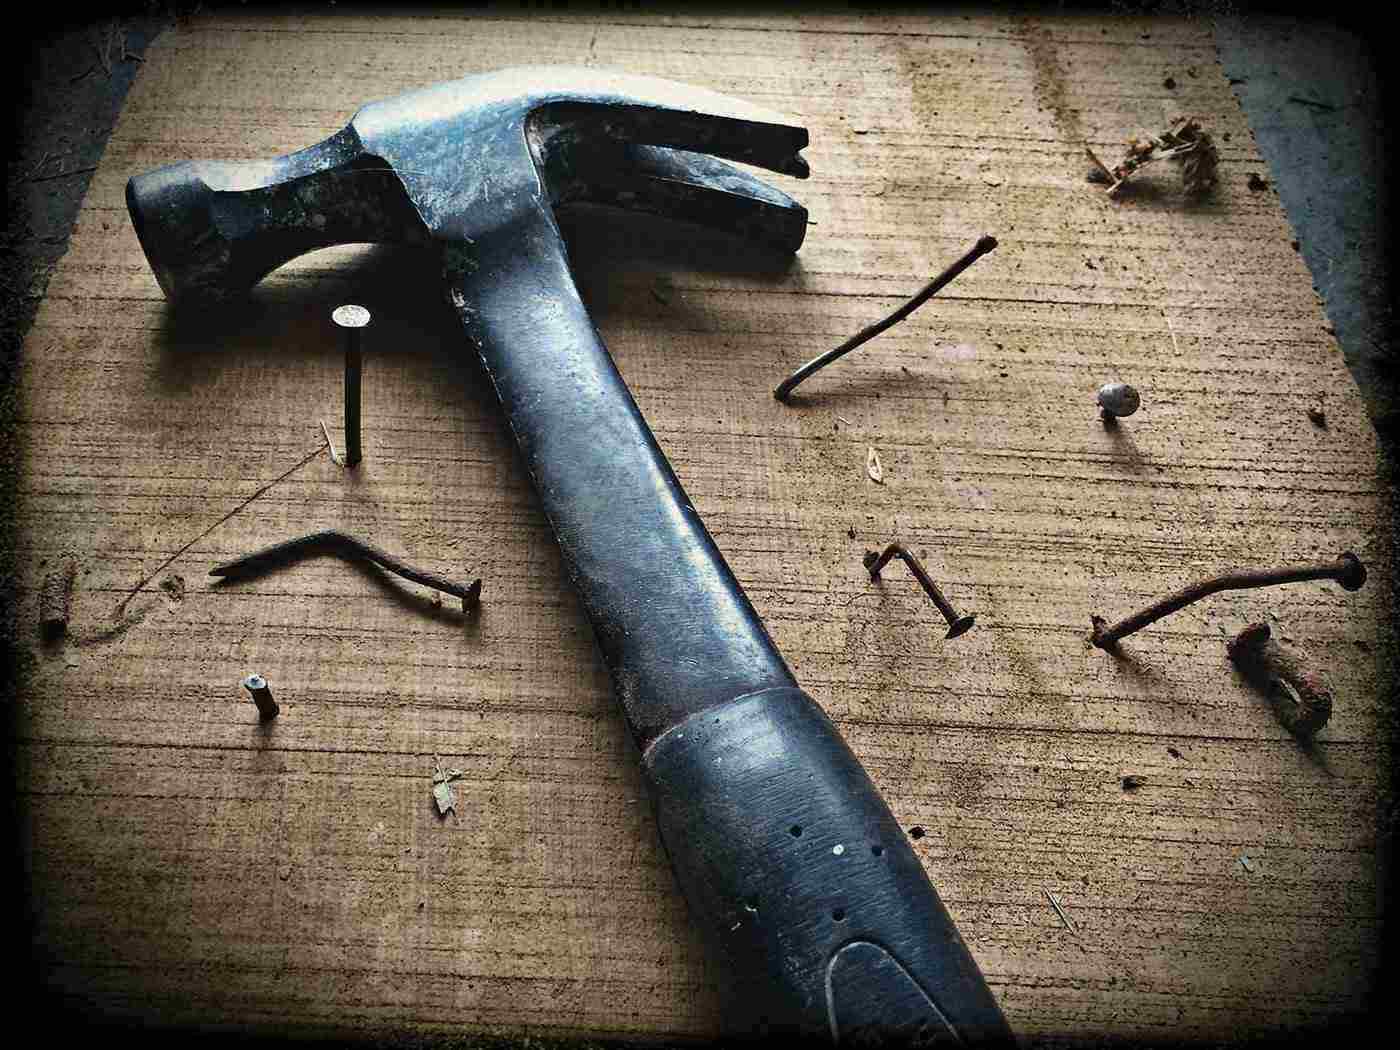 hammer and nails - home repairs not to diy